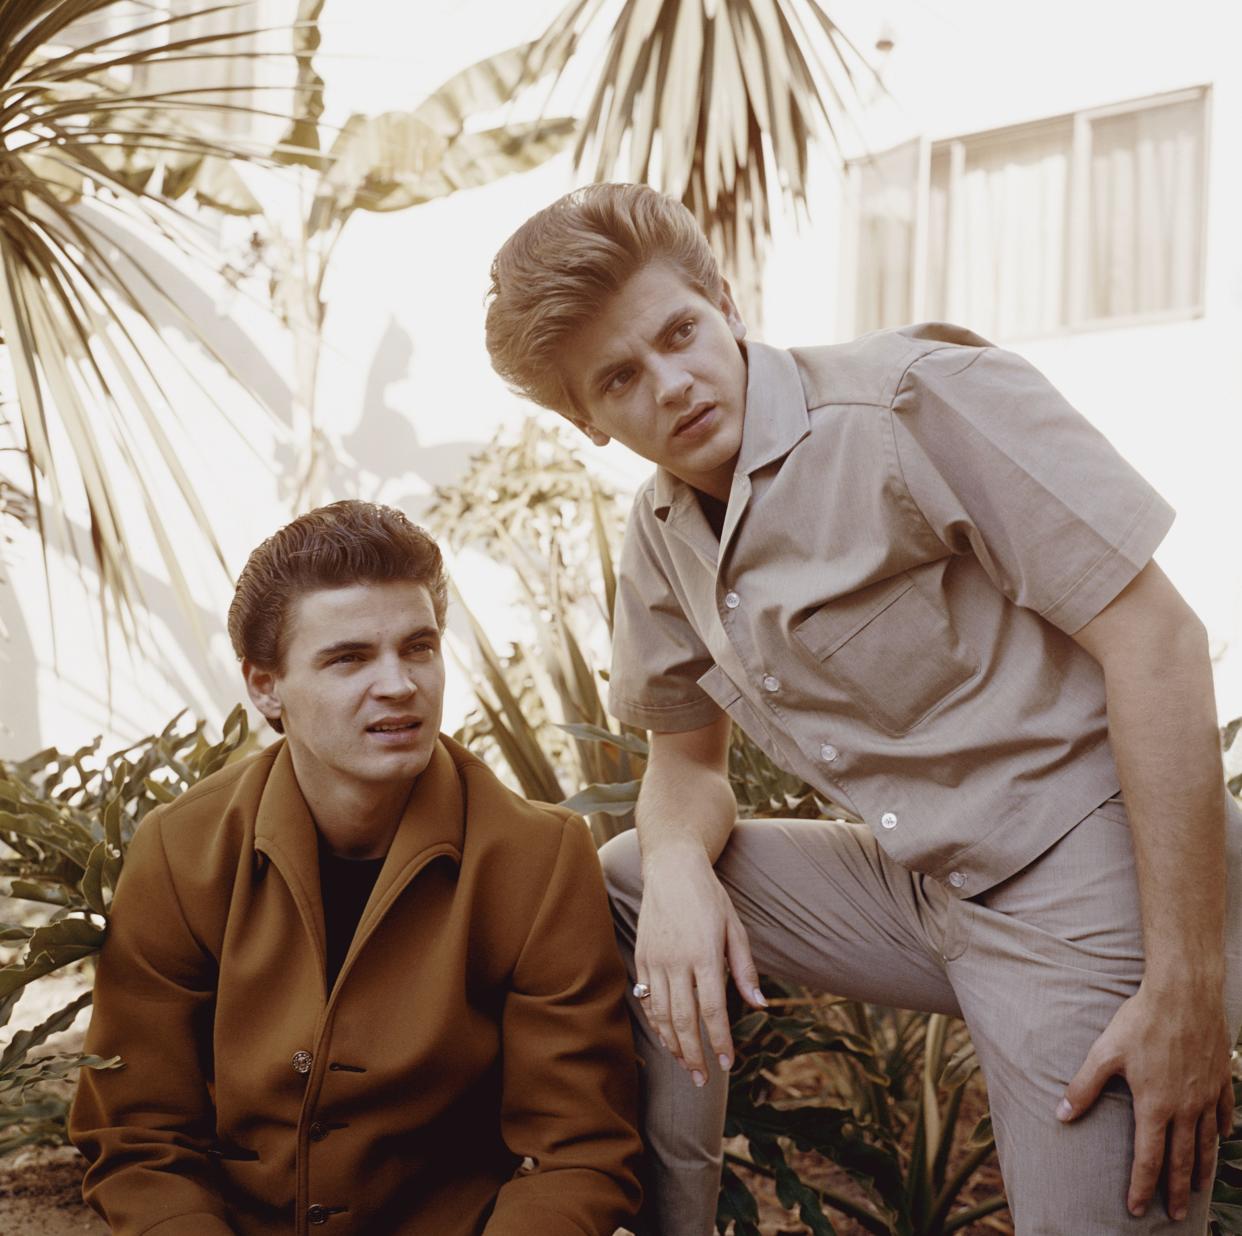 Don Everly, left, of the Rock and Roll brother duo Everly Brothers, died Saturday, Aug. 21, 2021. He was 84. Phil Everly died in 2014.